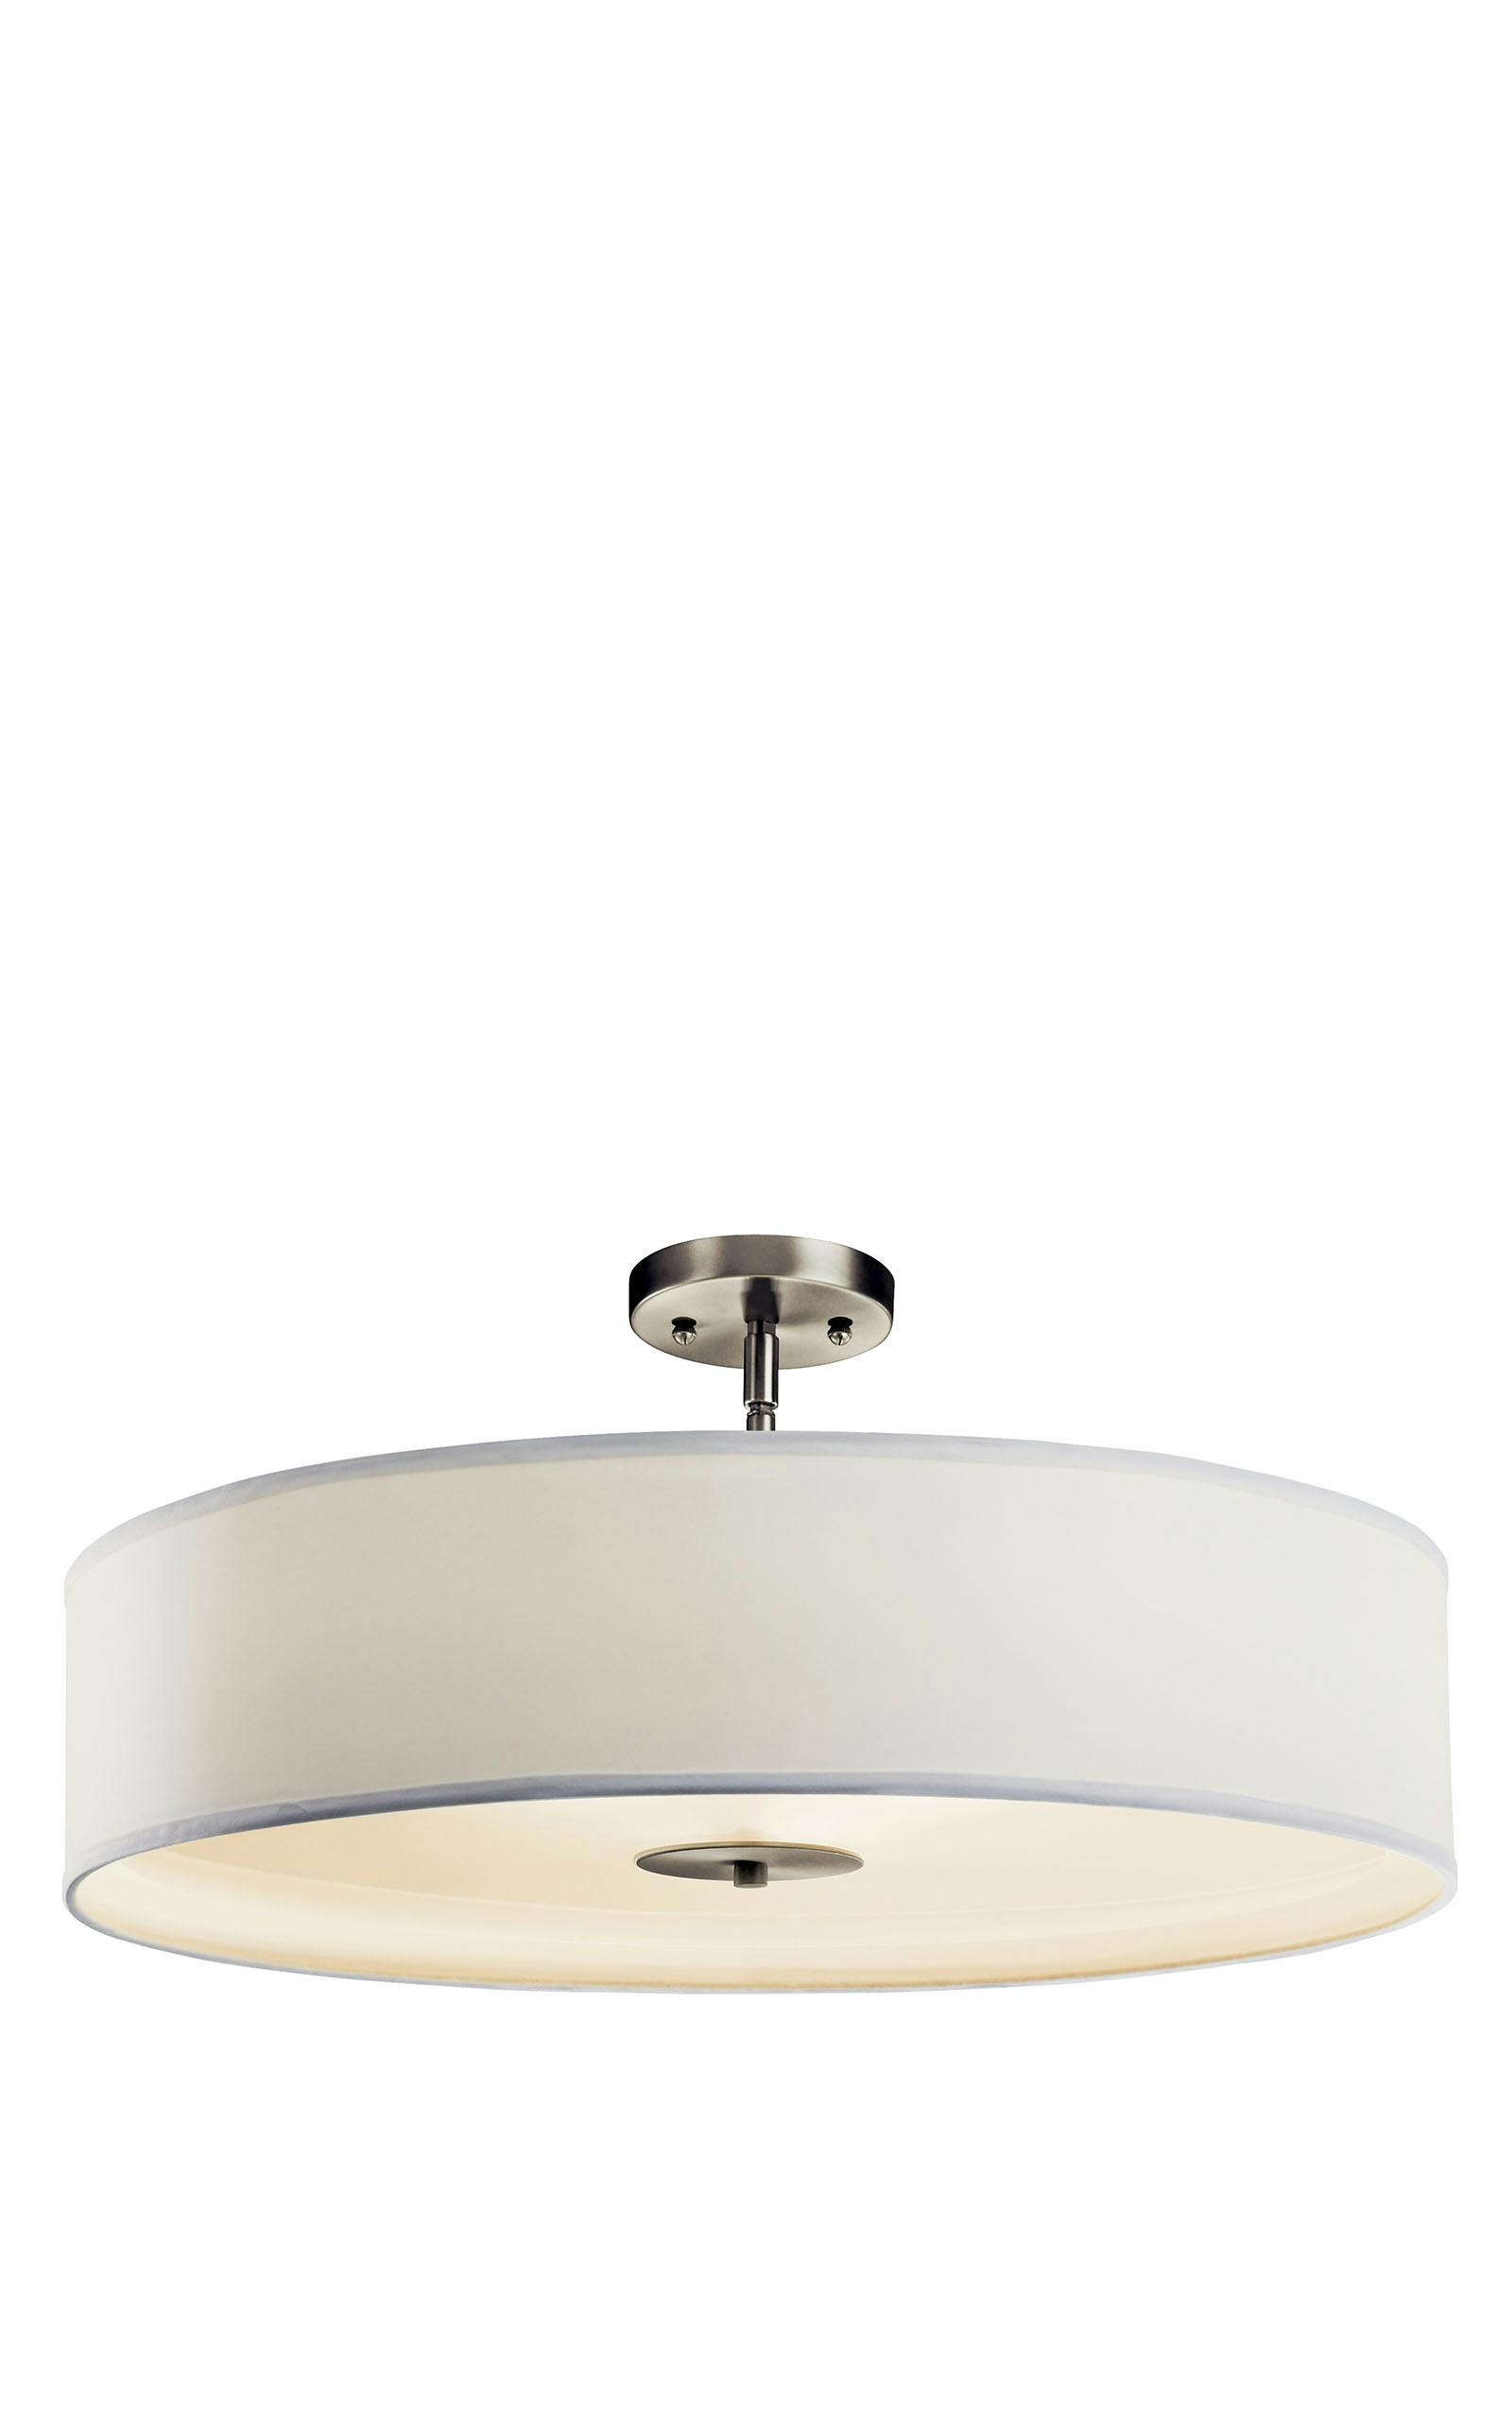 Product image of the 42122NI shown hung as a semi flush